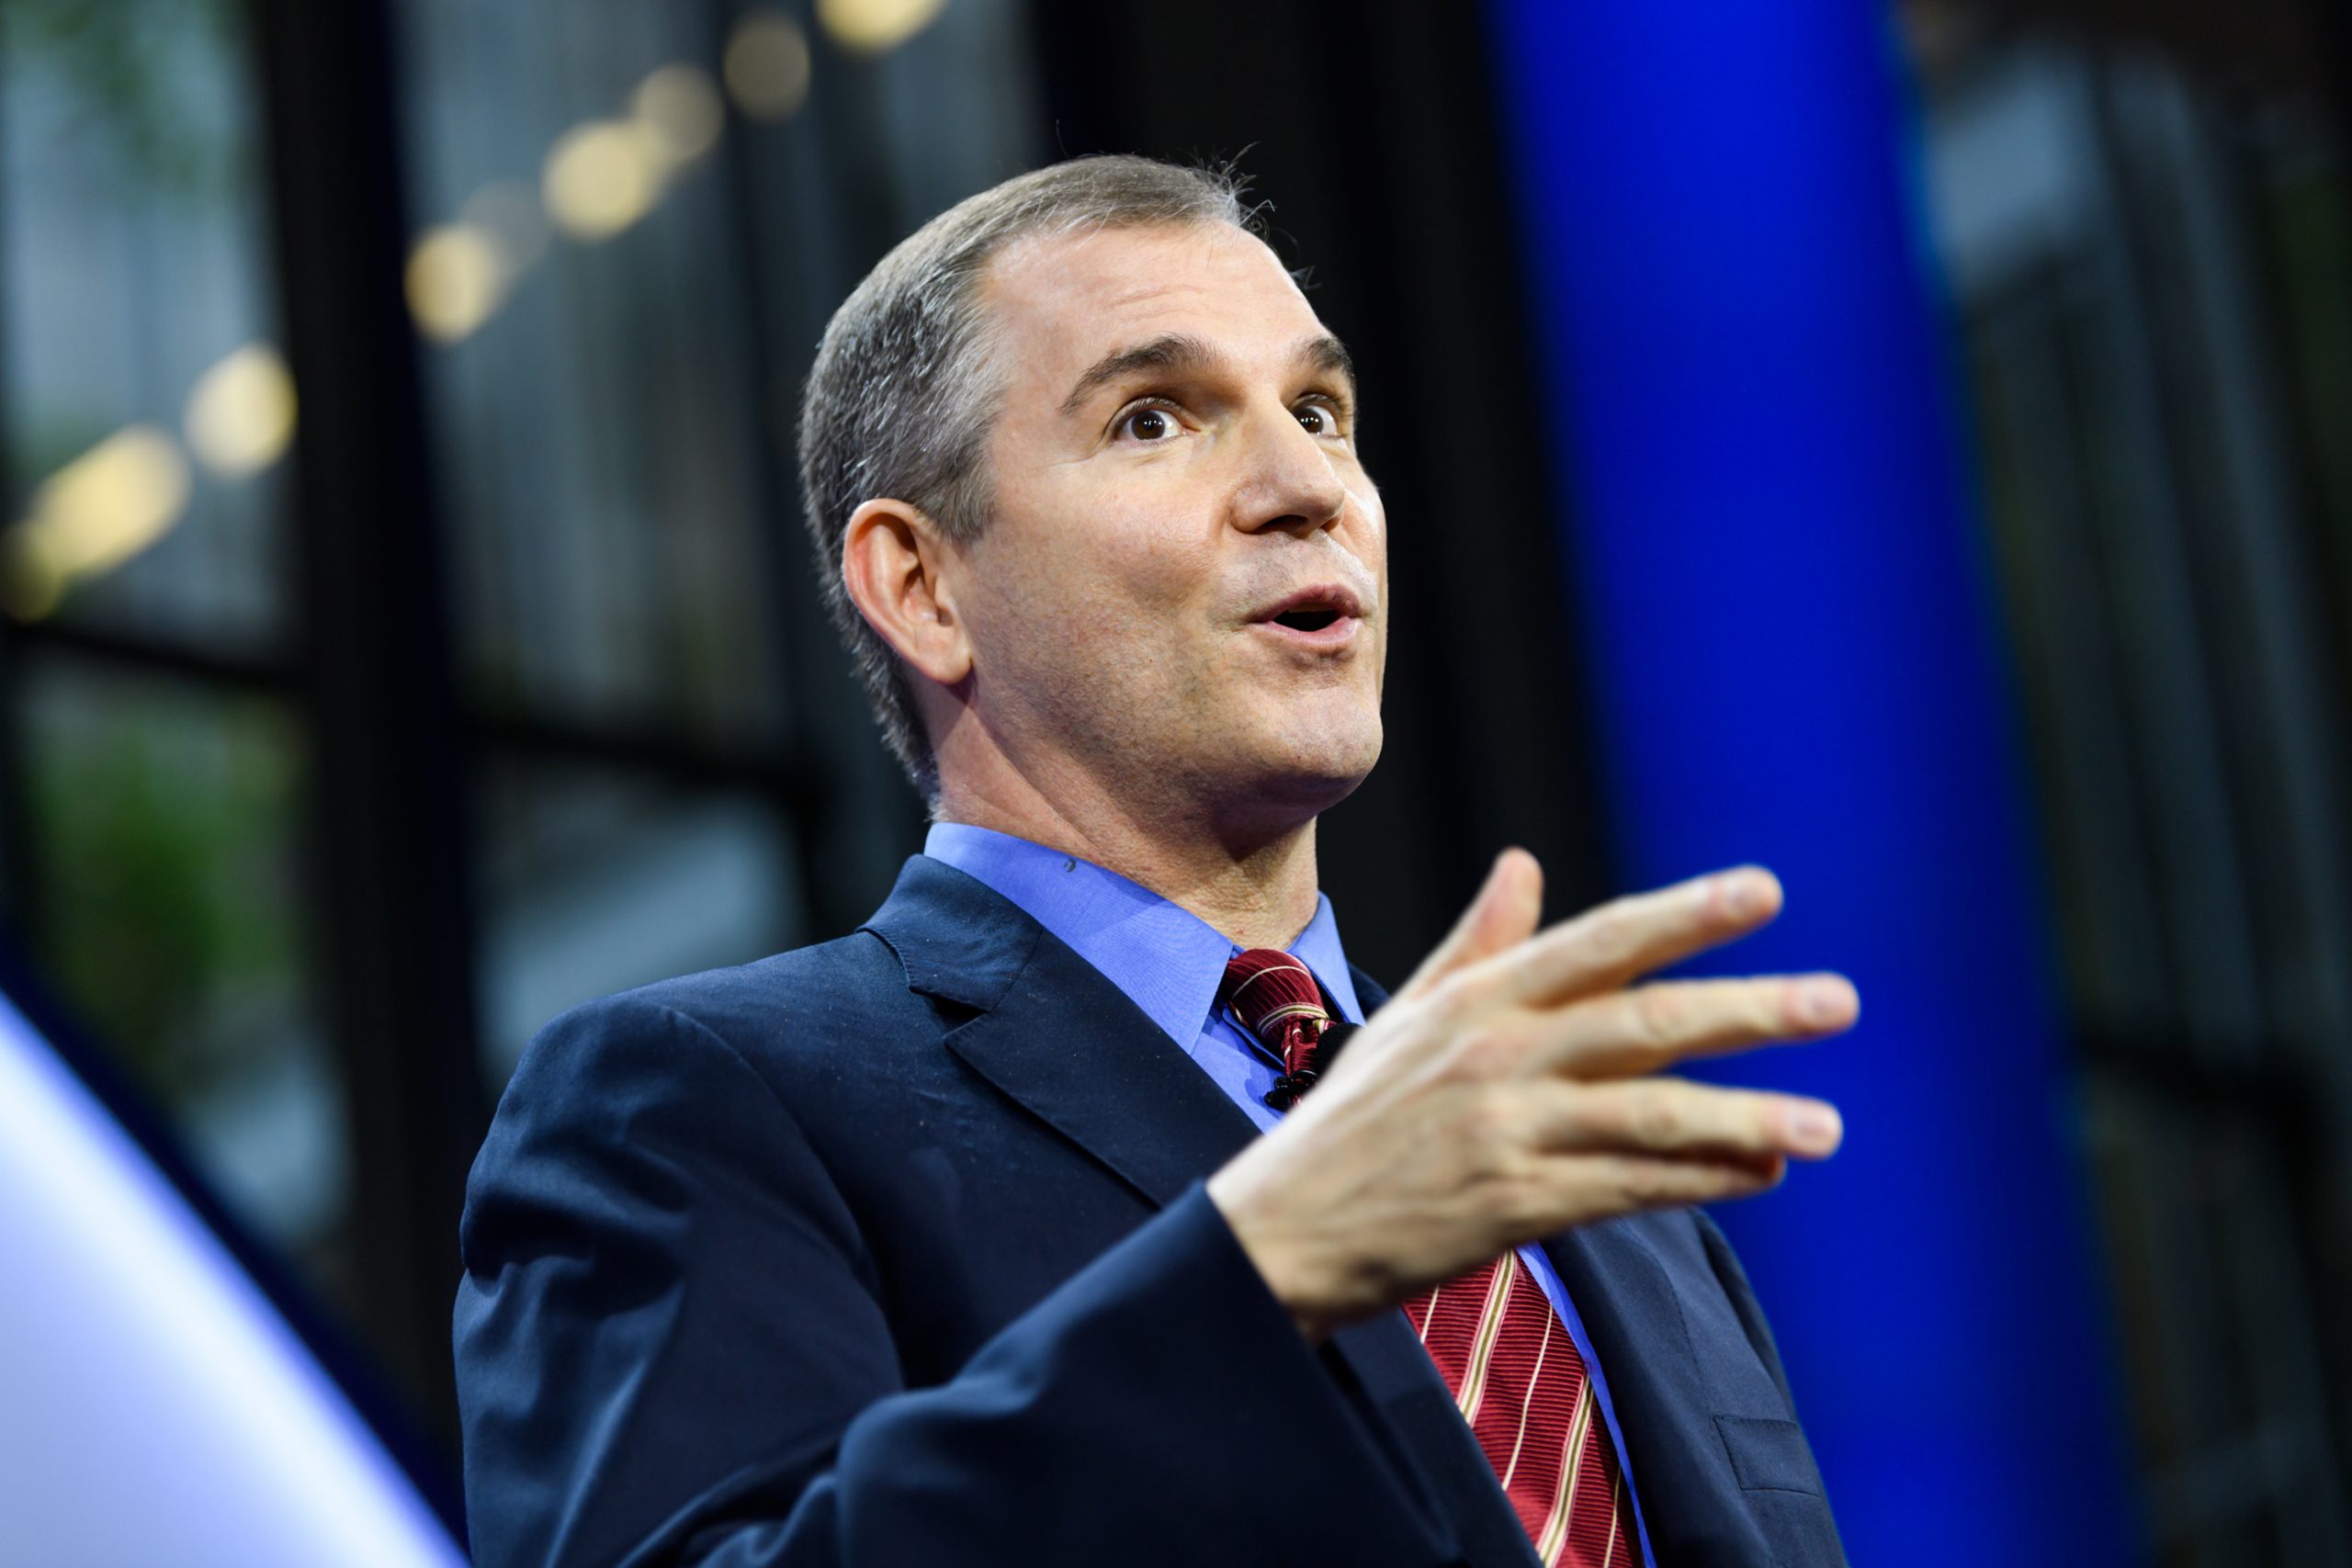 Frank Bruni speaks standing at a podium.